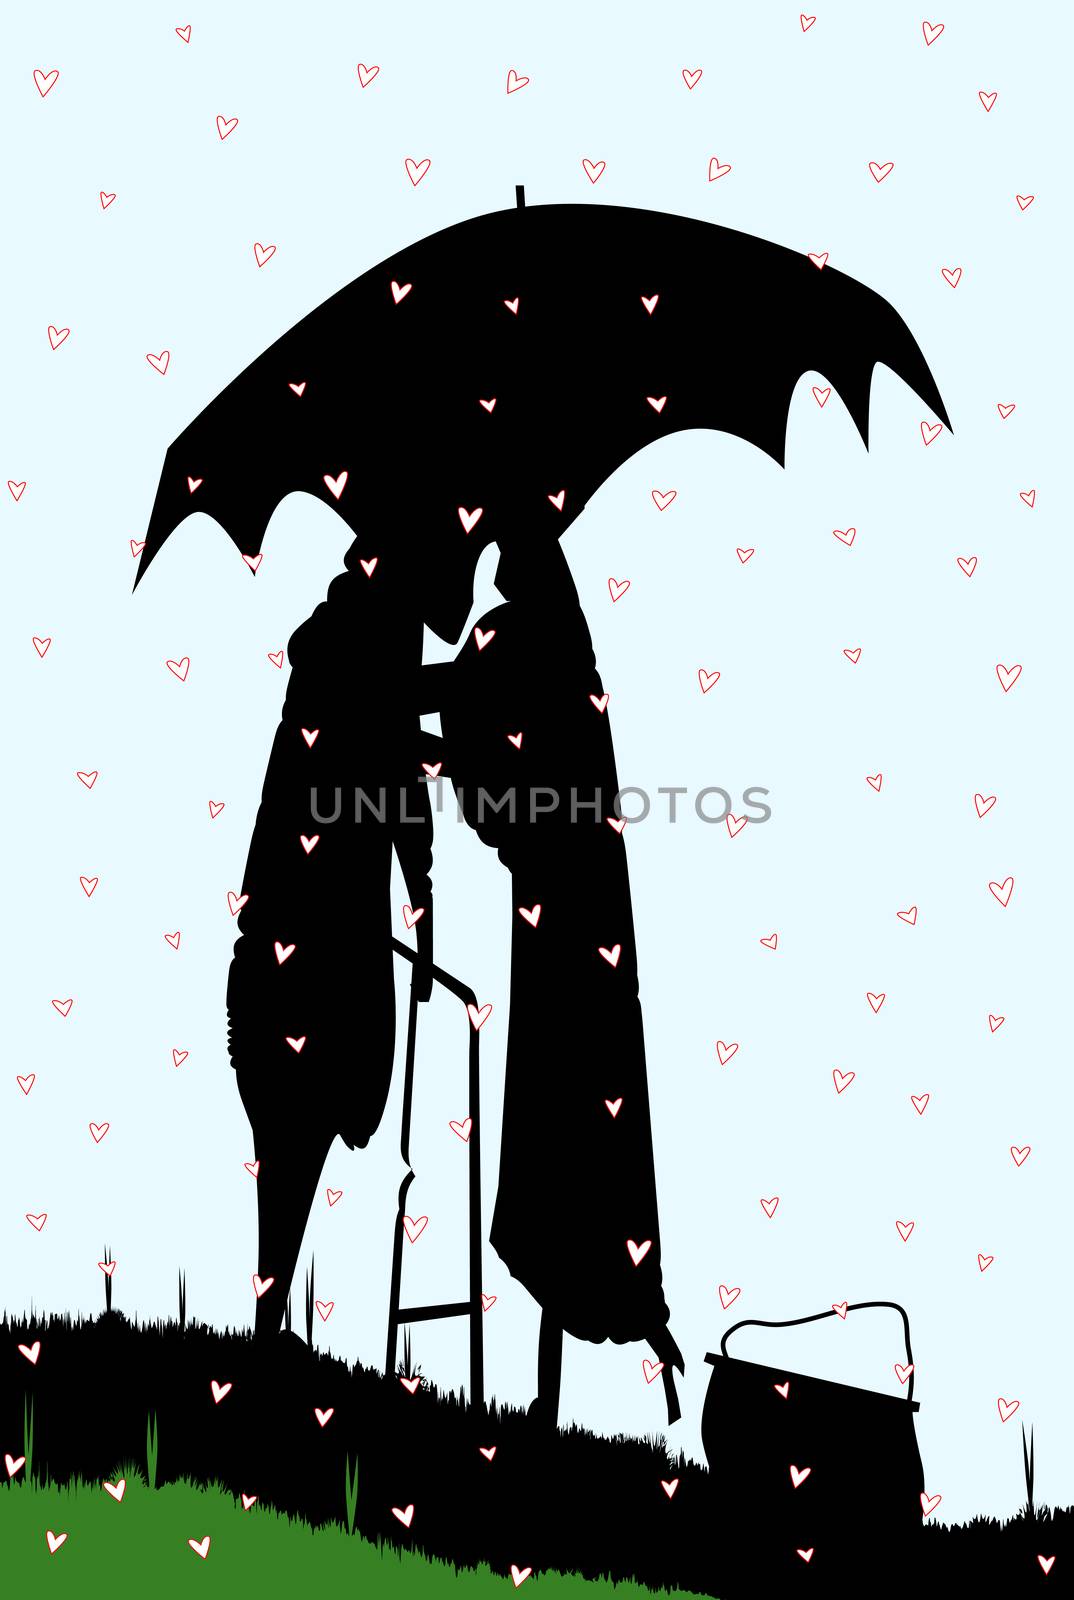 An old couple, silhouetted, kissing under an umbrella, during a downpour of red cupids hearts.